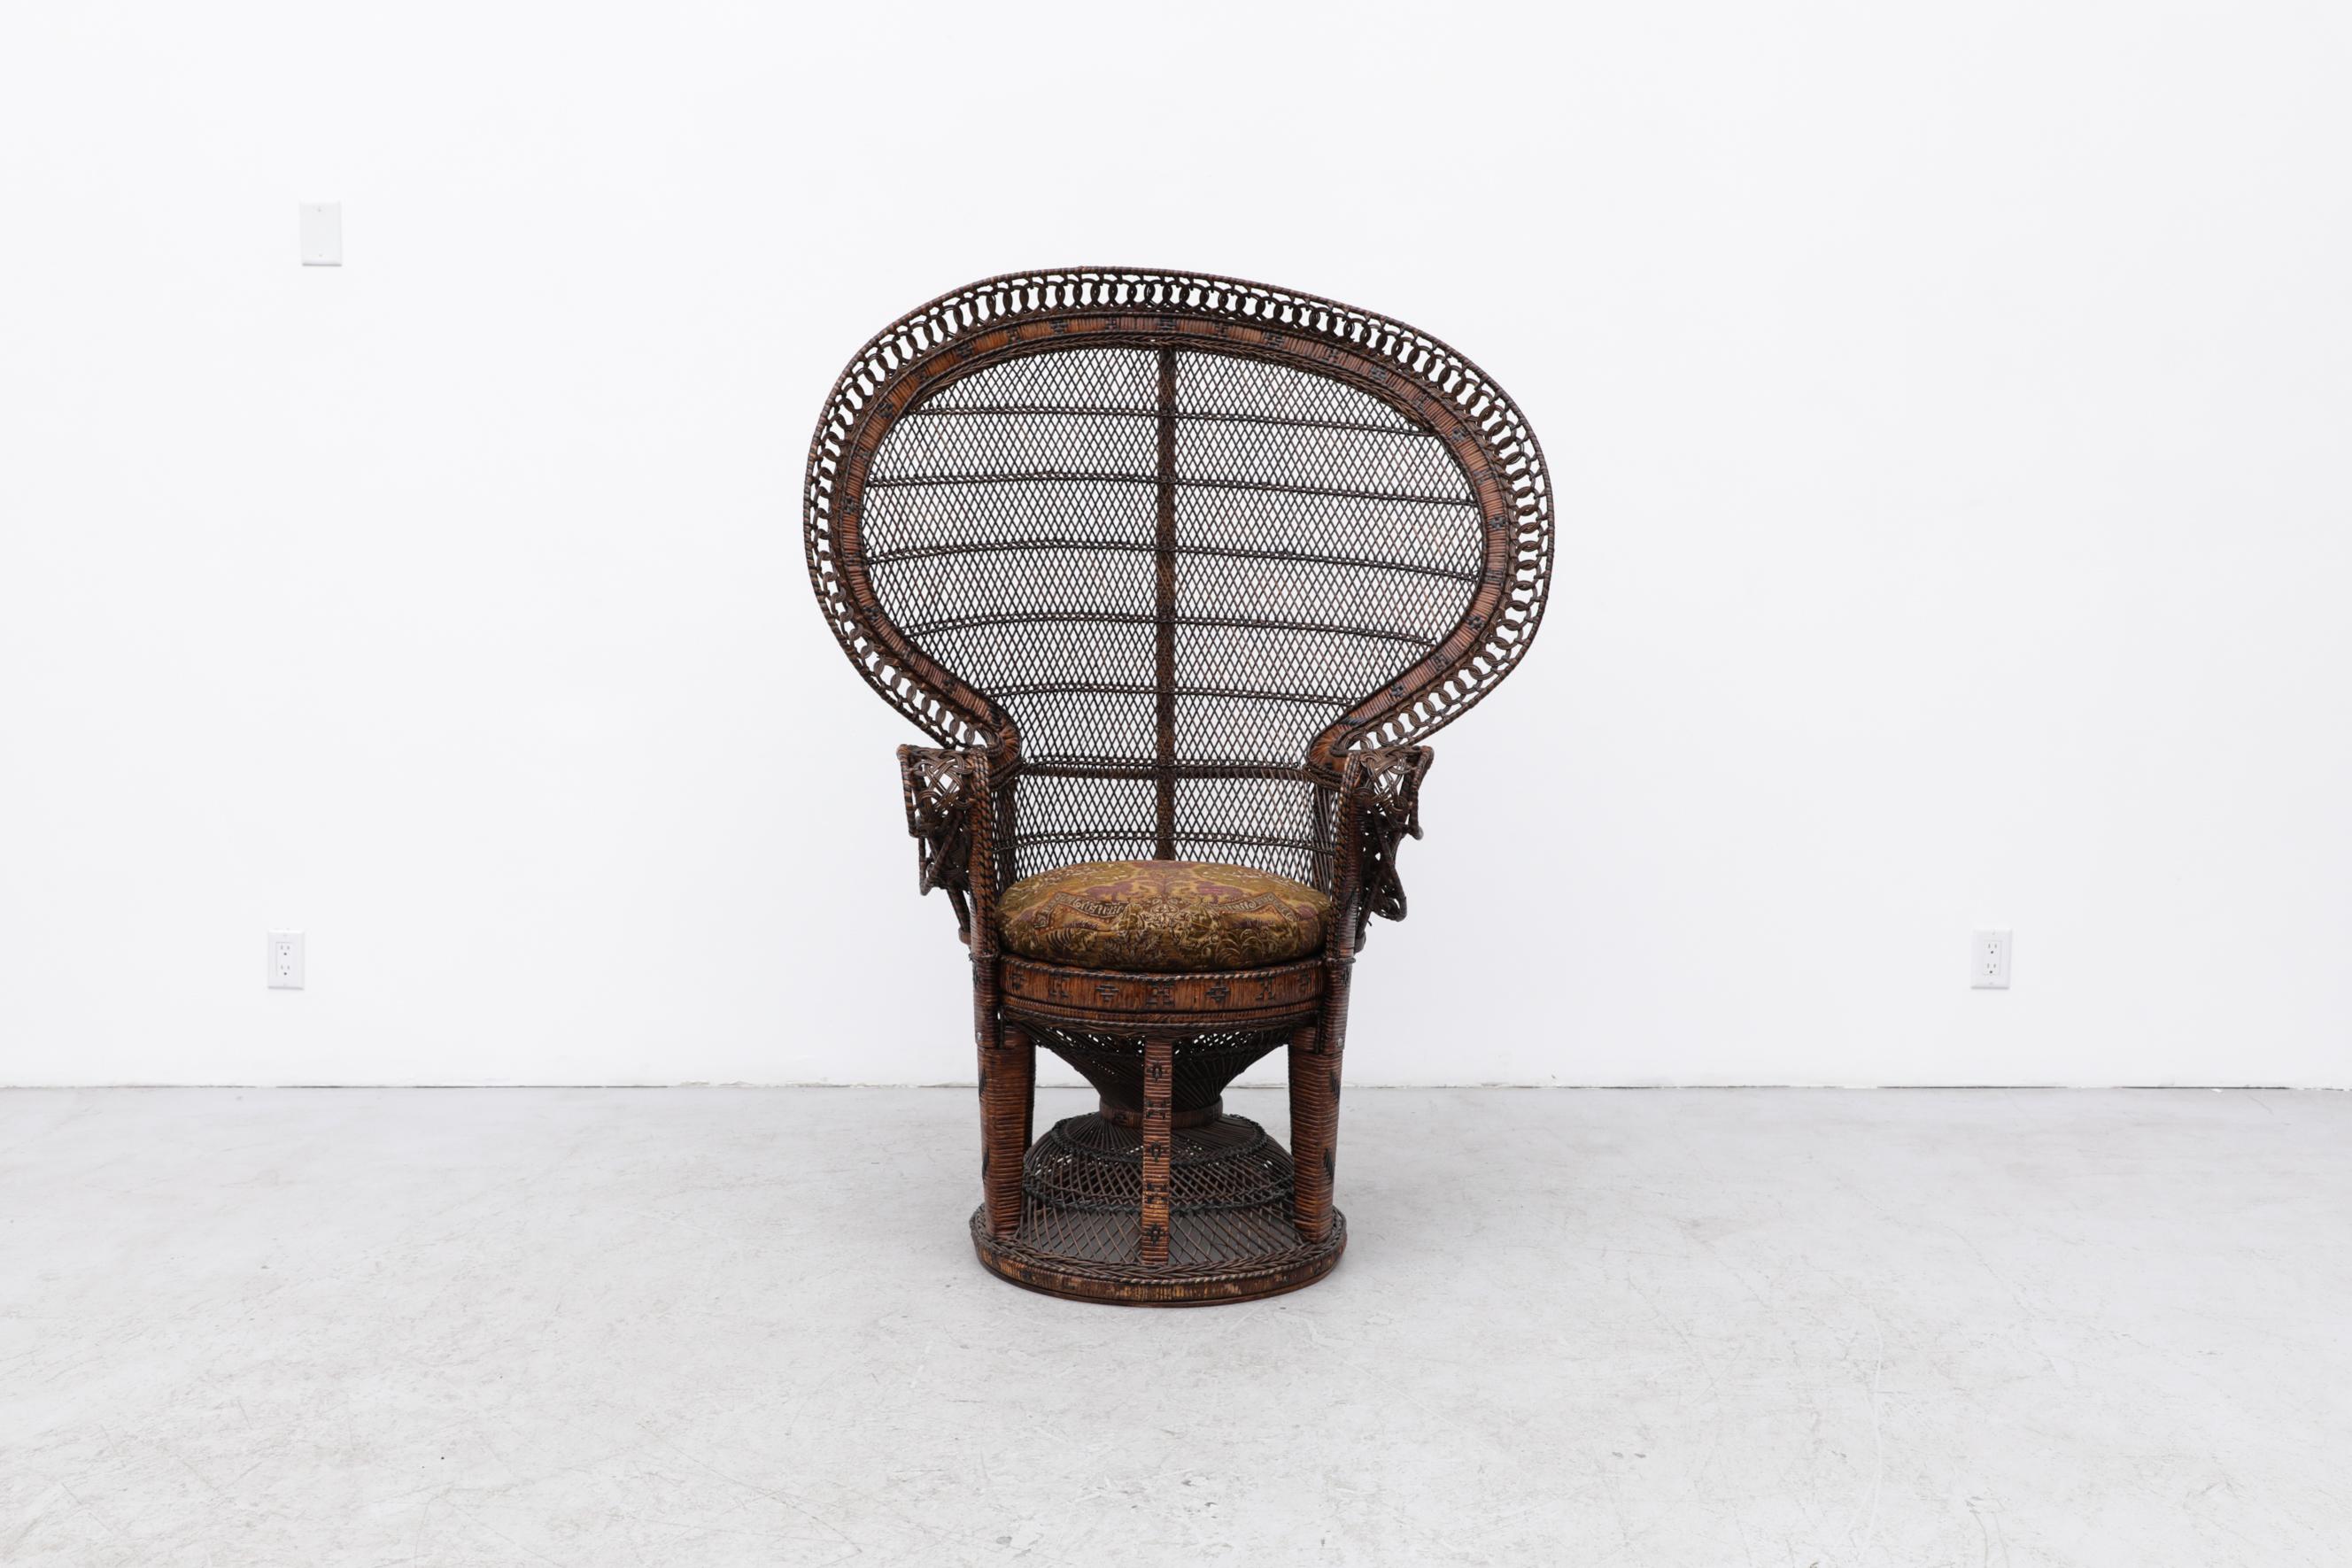 The Iconic Emmanuelle Wicker Peacock Chair. Made famous by Huey P. Newton photographed in the Peacock chair in 1967 and then later by the 1974 French film, Emmanuelle. The chair is in original condition with visible wear, consistent with its age and